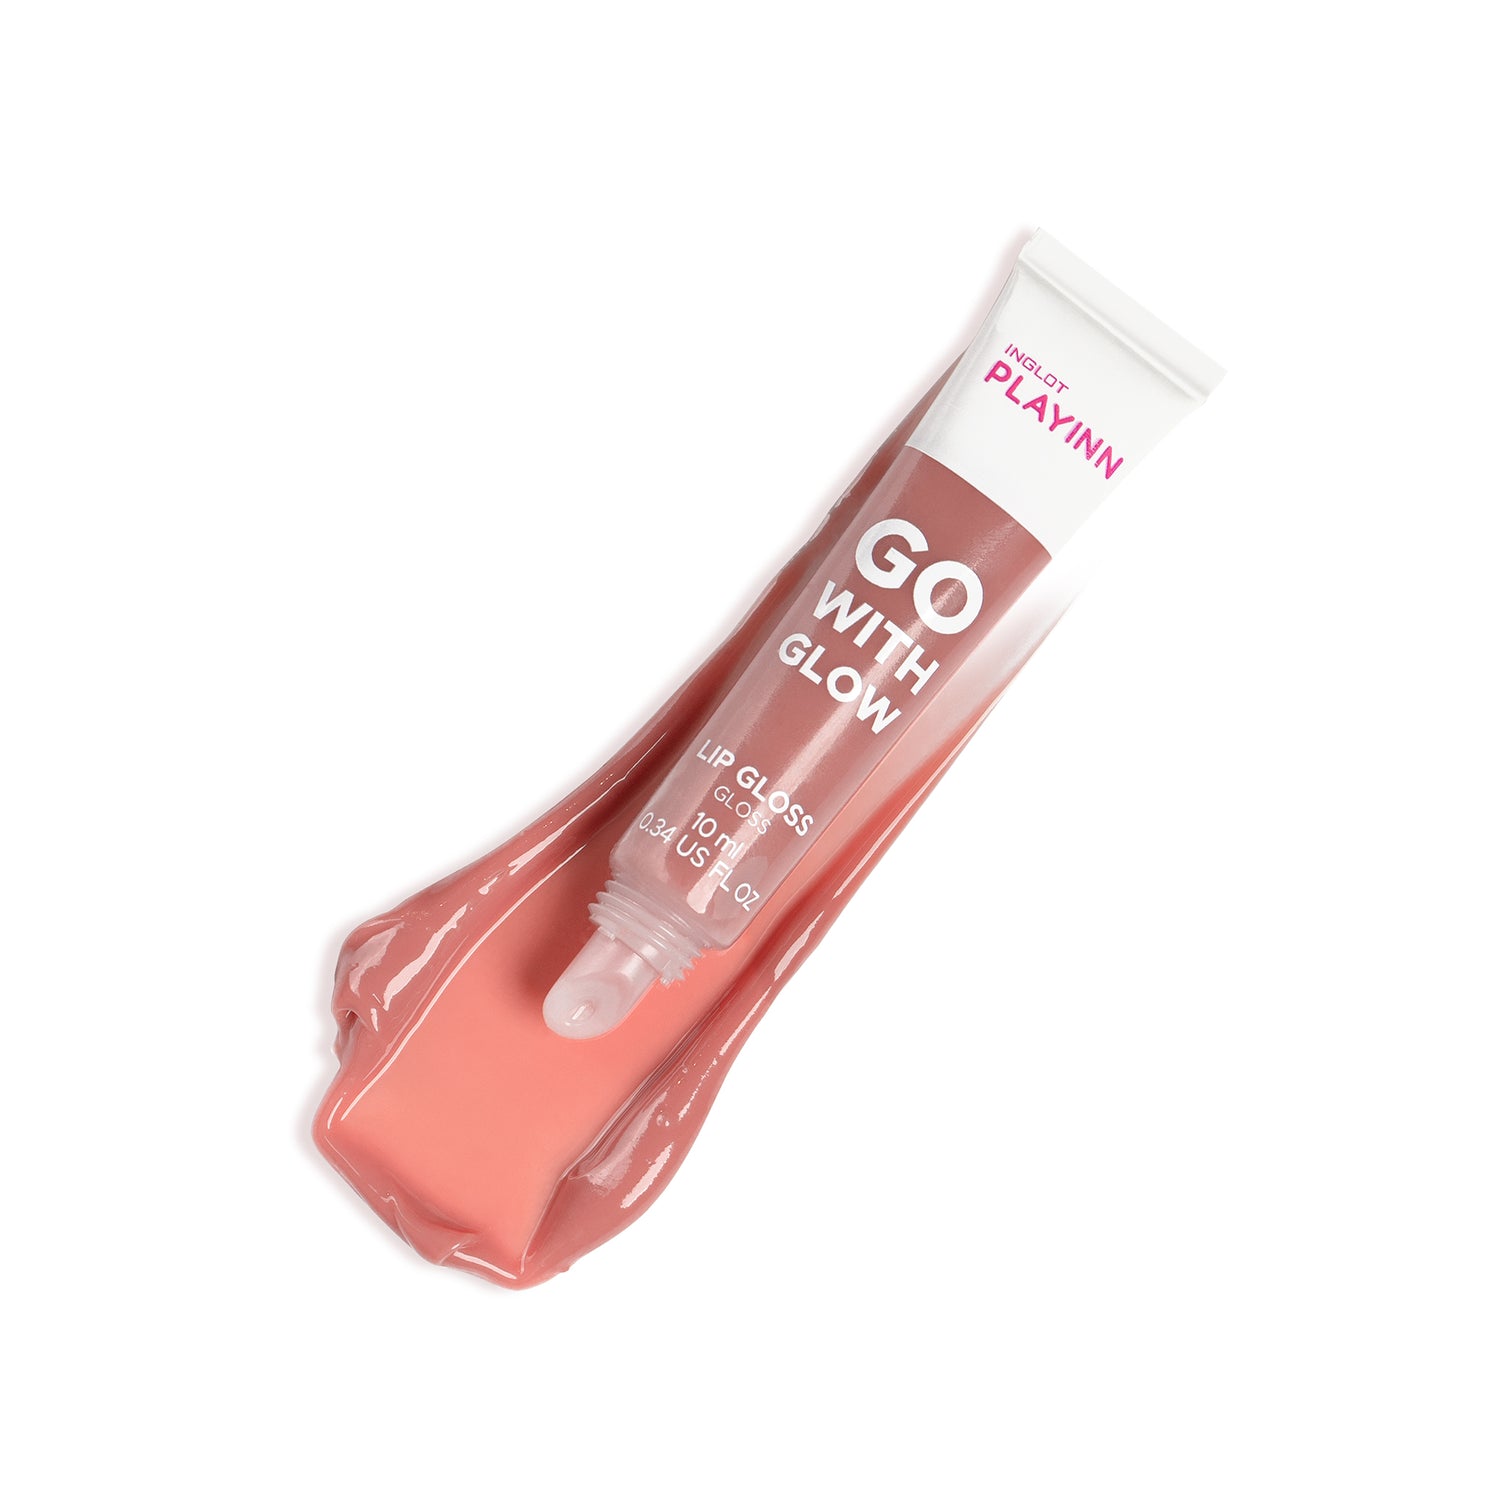 Go With Glow Lipgloss 23 - Inglot Cosmetics